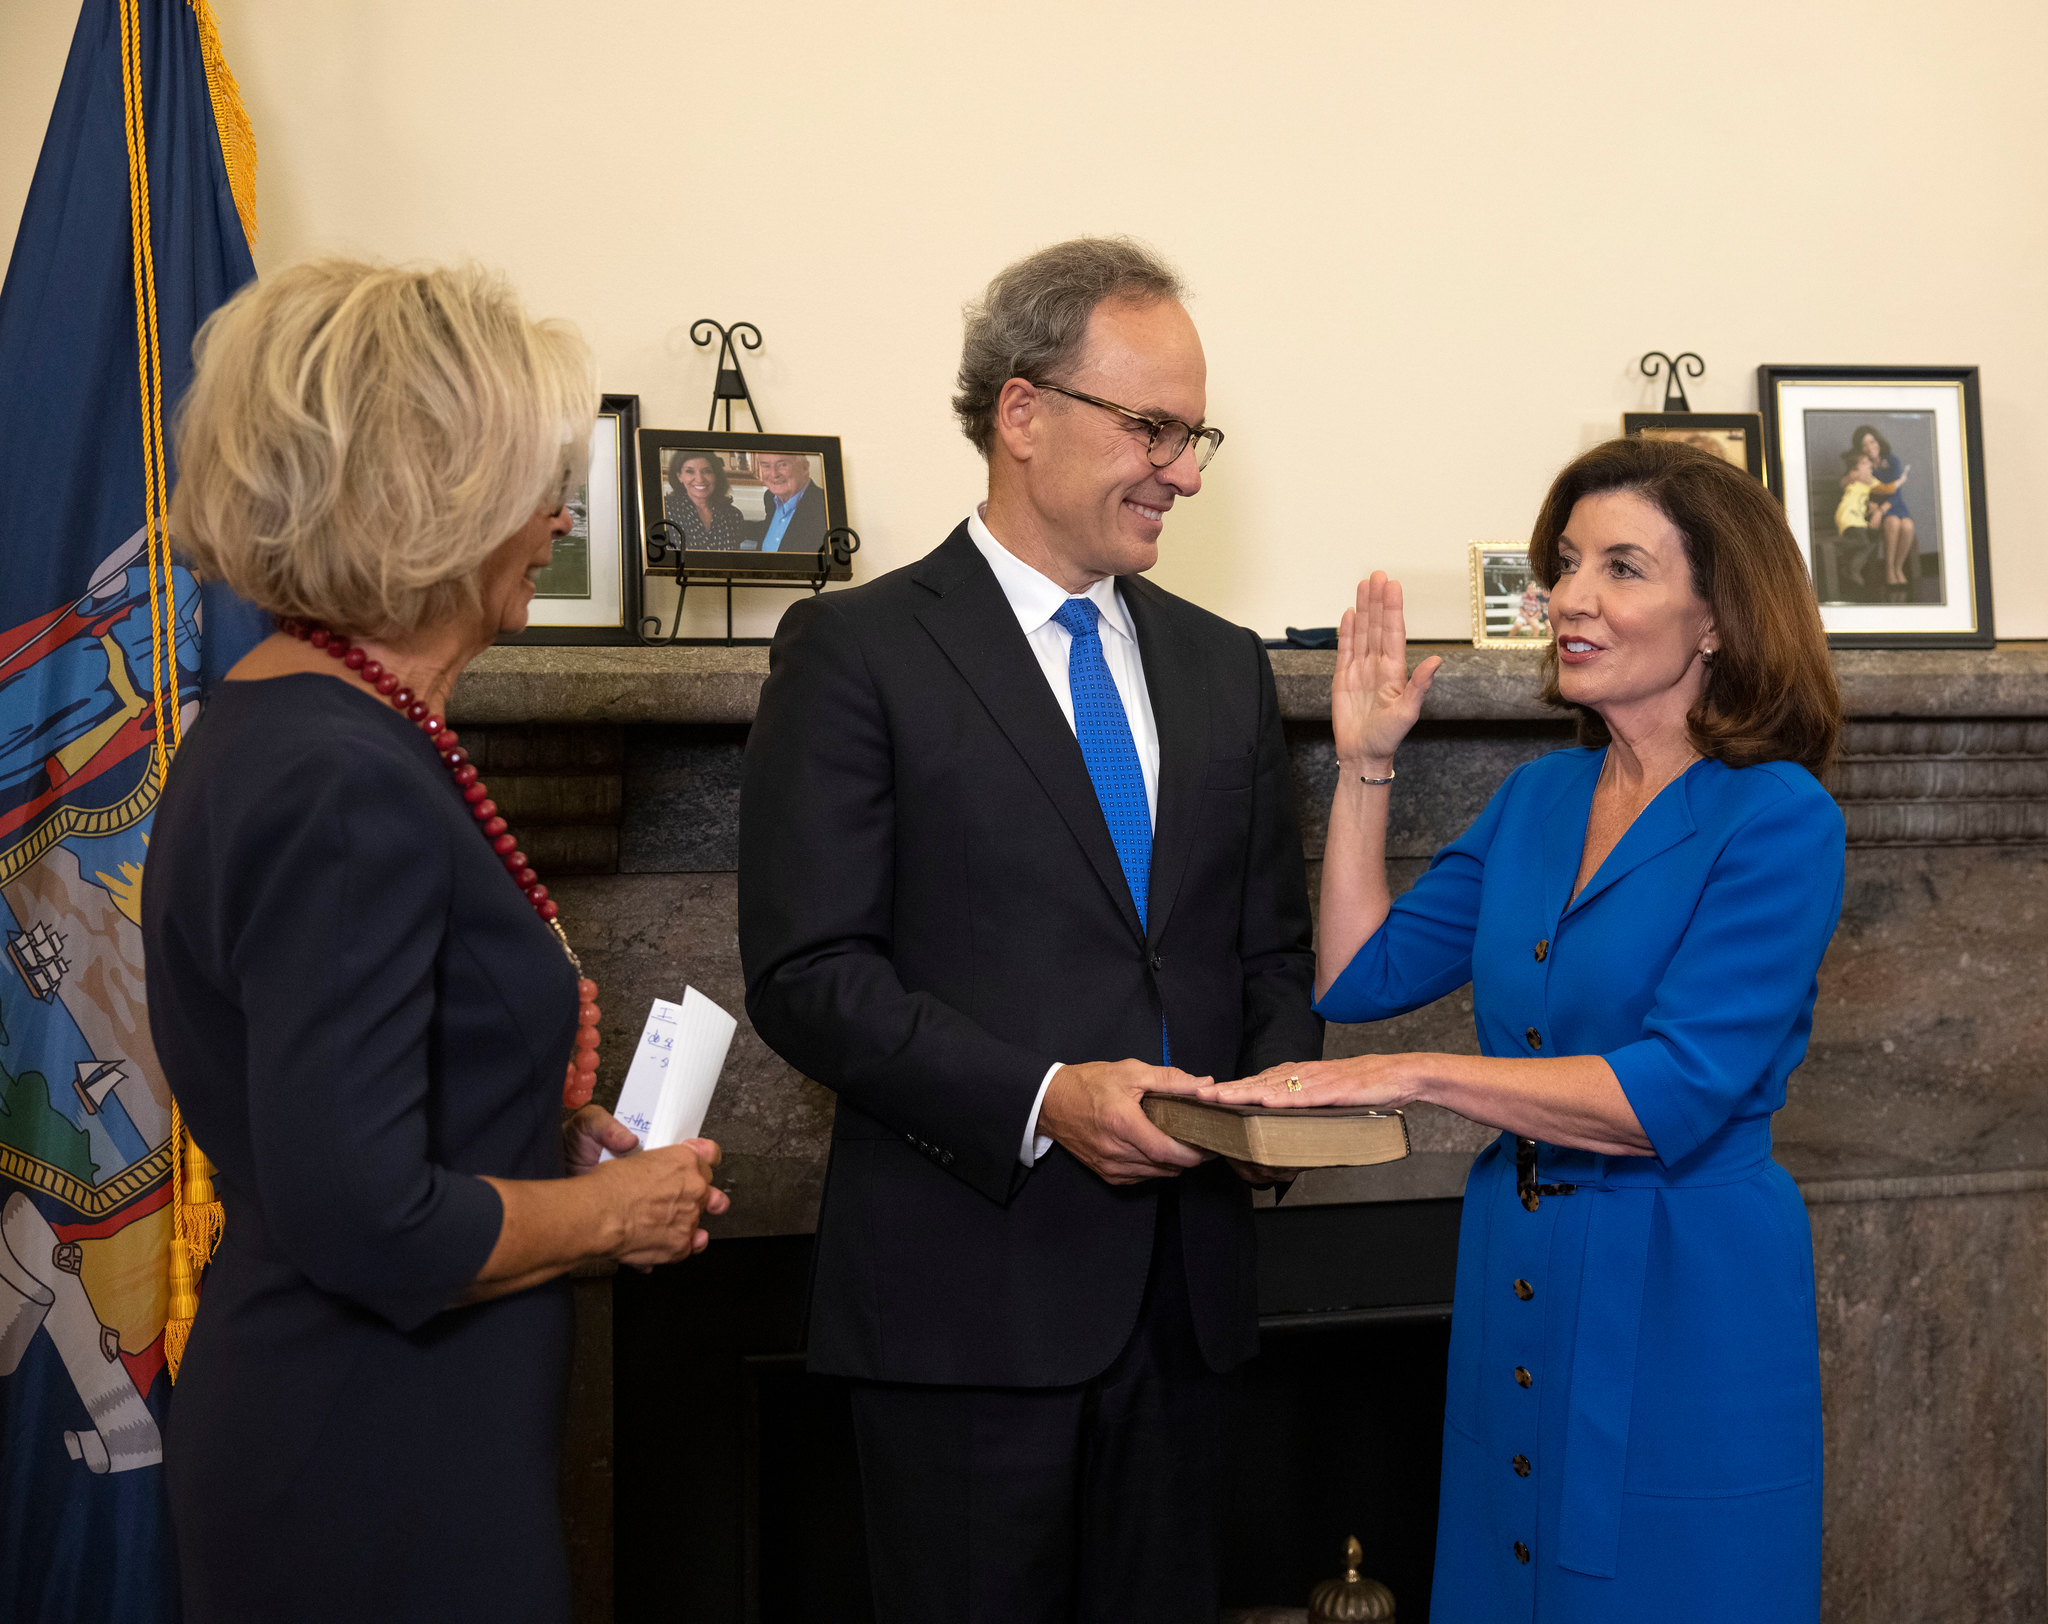 Gov. Kathy Hochul is sworn-in as New York state's 57th governor by Chief Judge Janet DiFiore during a midnight ceremony at the New York State Capitol. First Gentleman Bill Hochul holds the Bible. (Photo by Mike Groll/Office of Gov. Kathy Hochul)